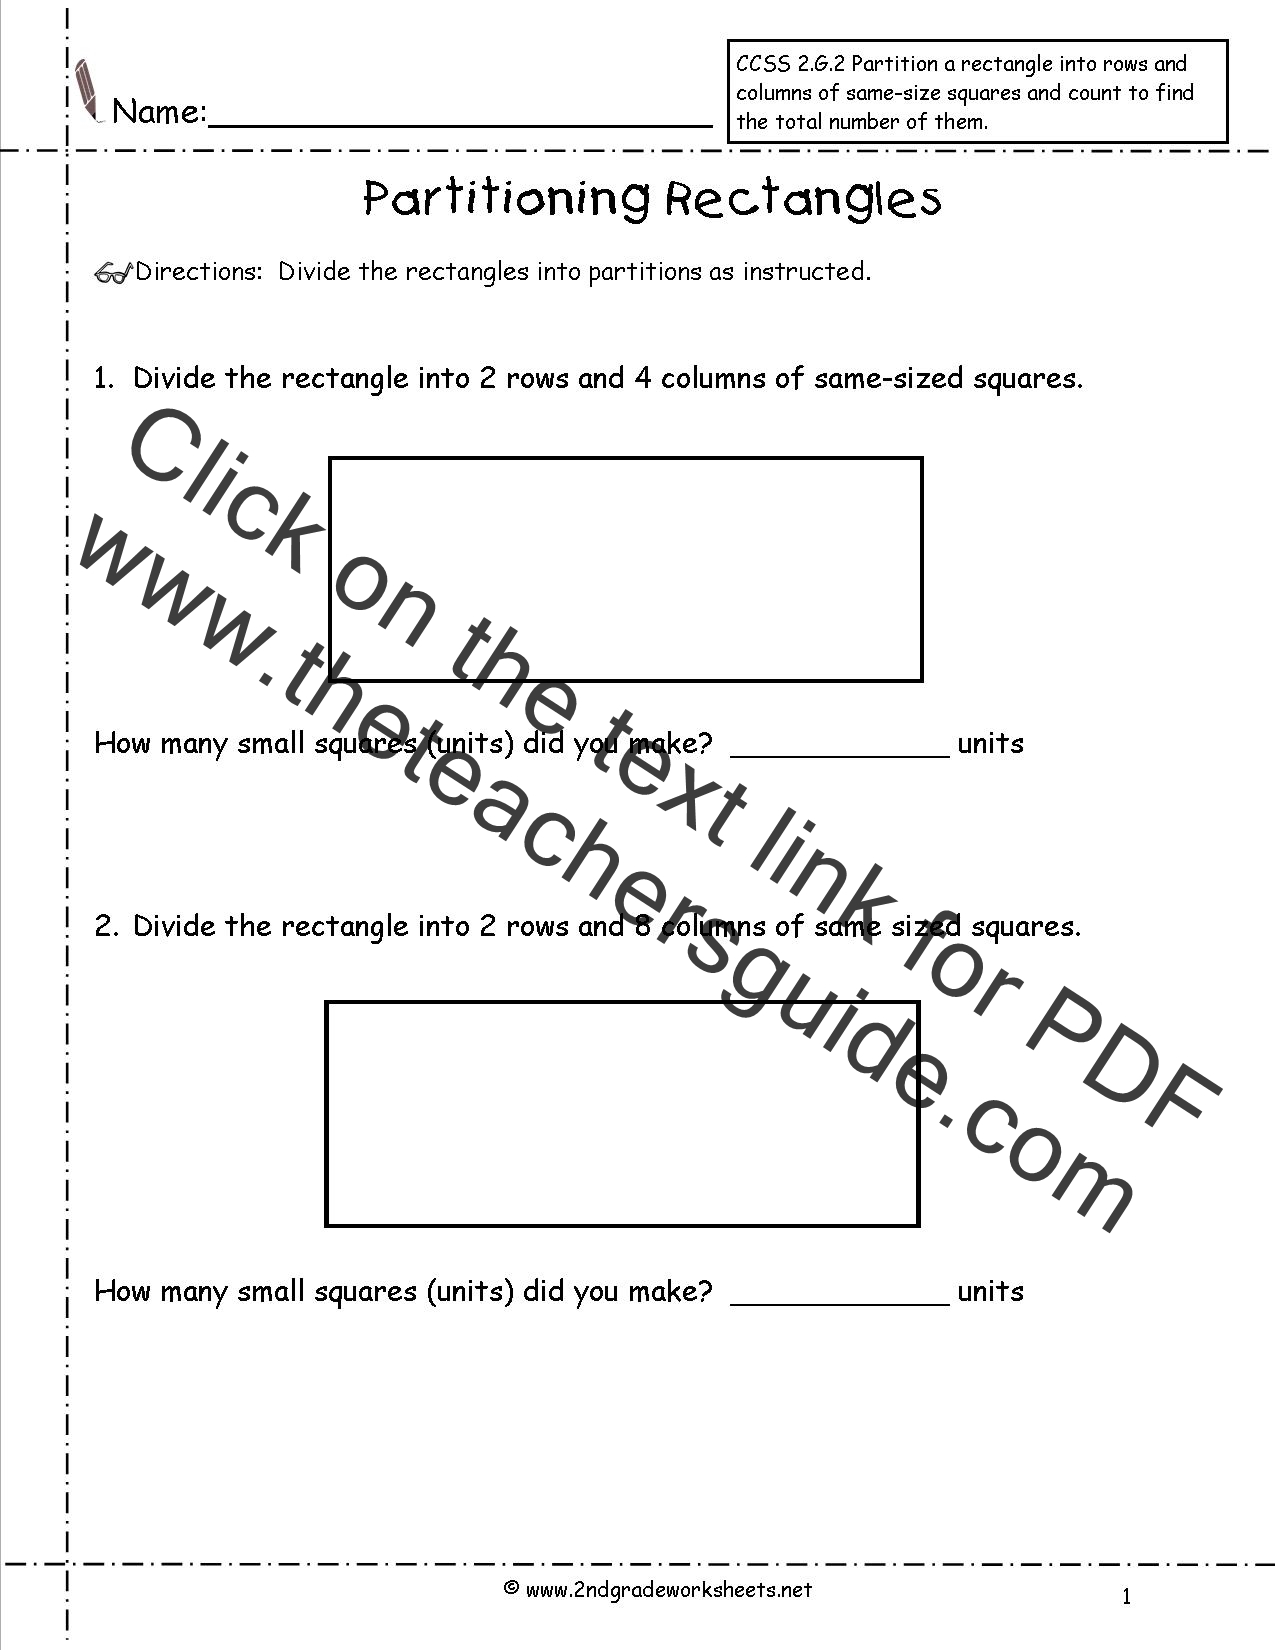 Partition Rectangles Worksheets CCSS 2 G 2